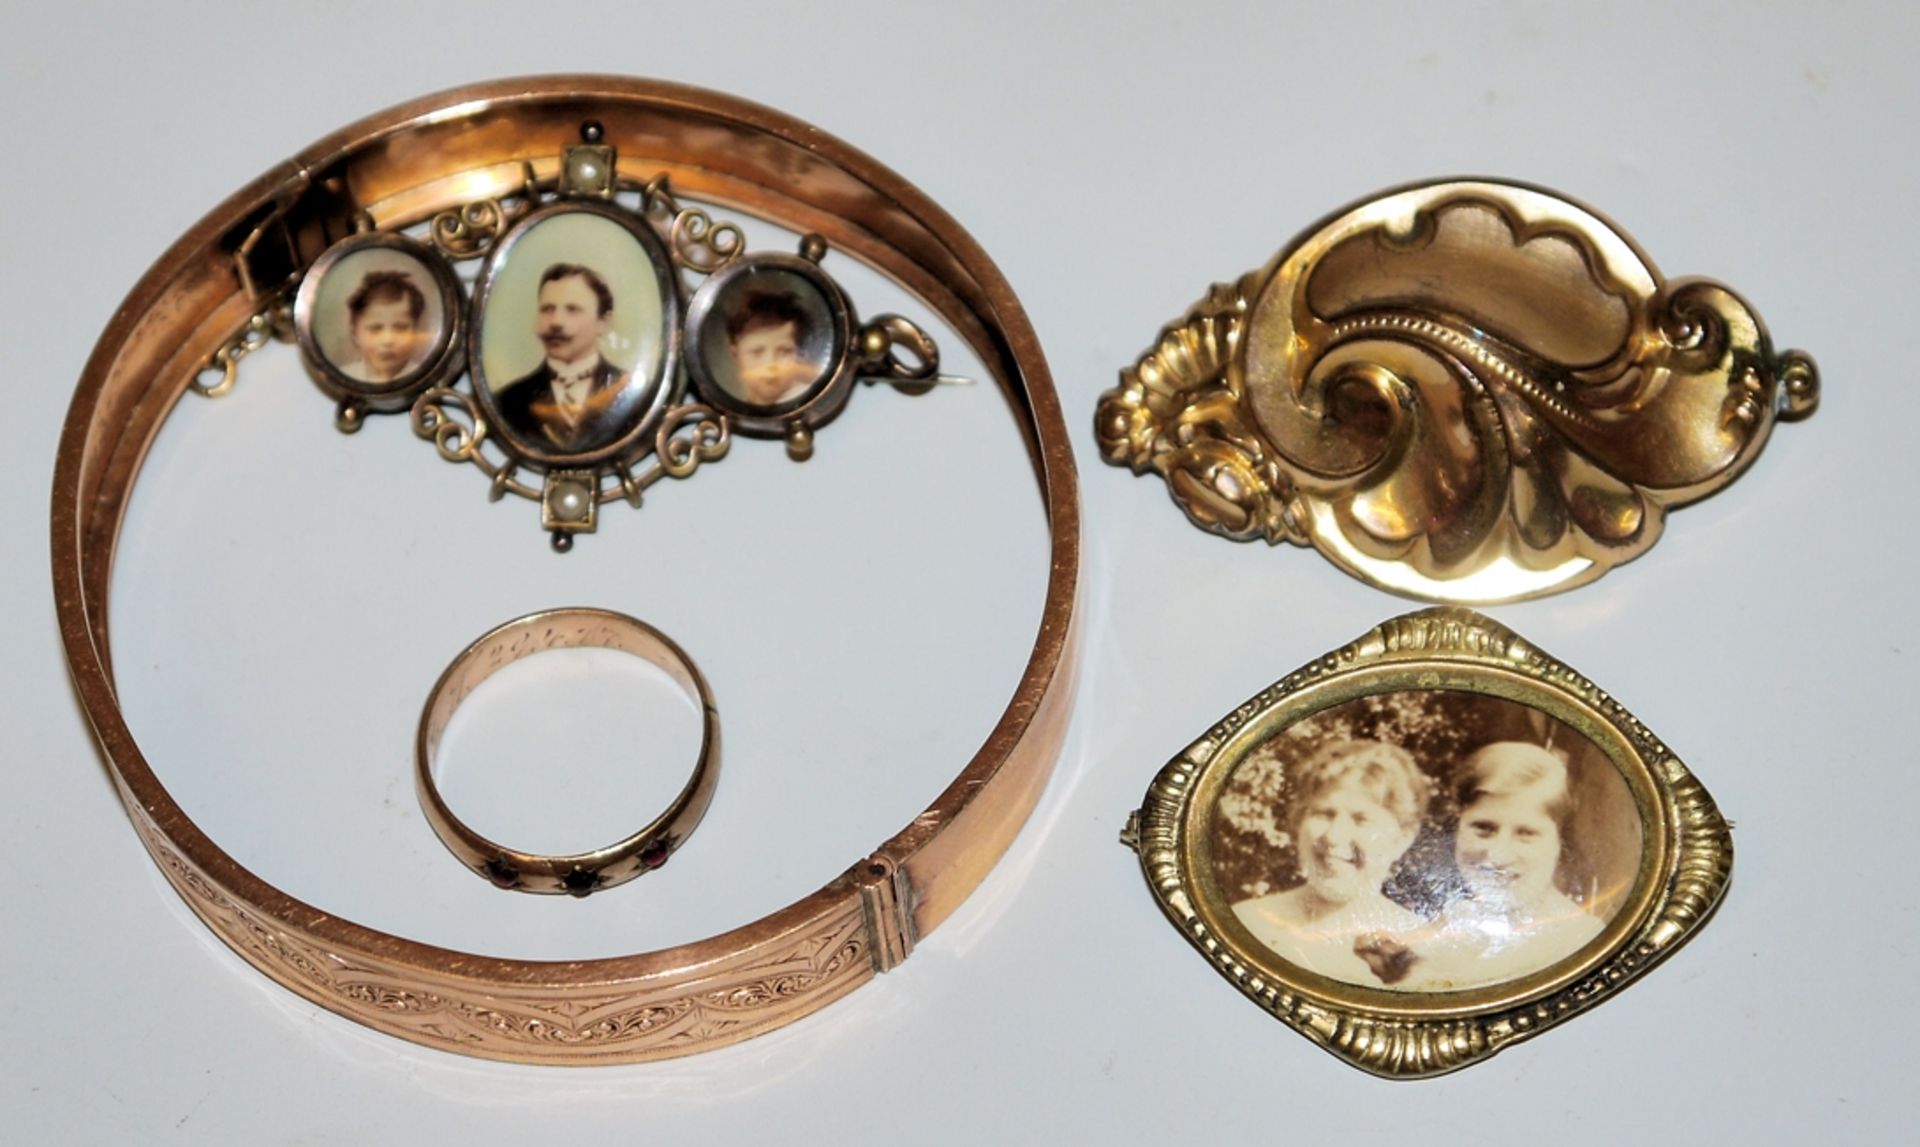 Collection of gold jewellery and gilded objects, late 19th century / around 1900